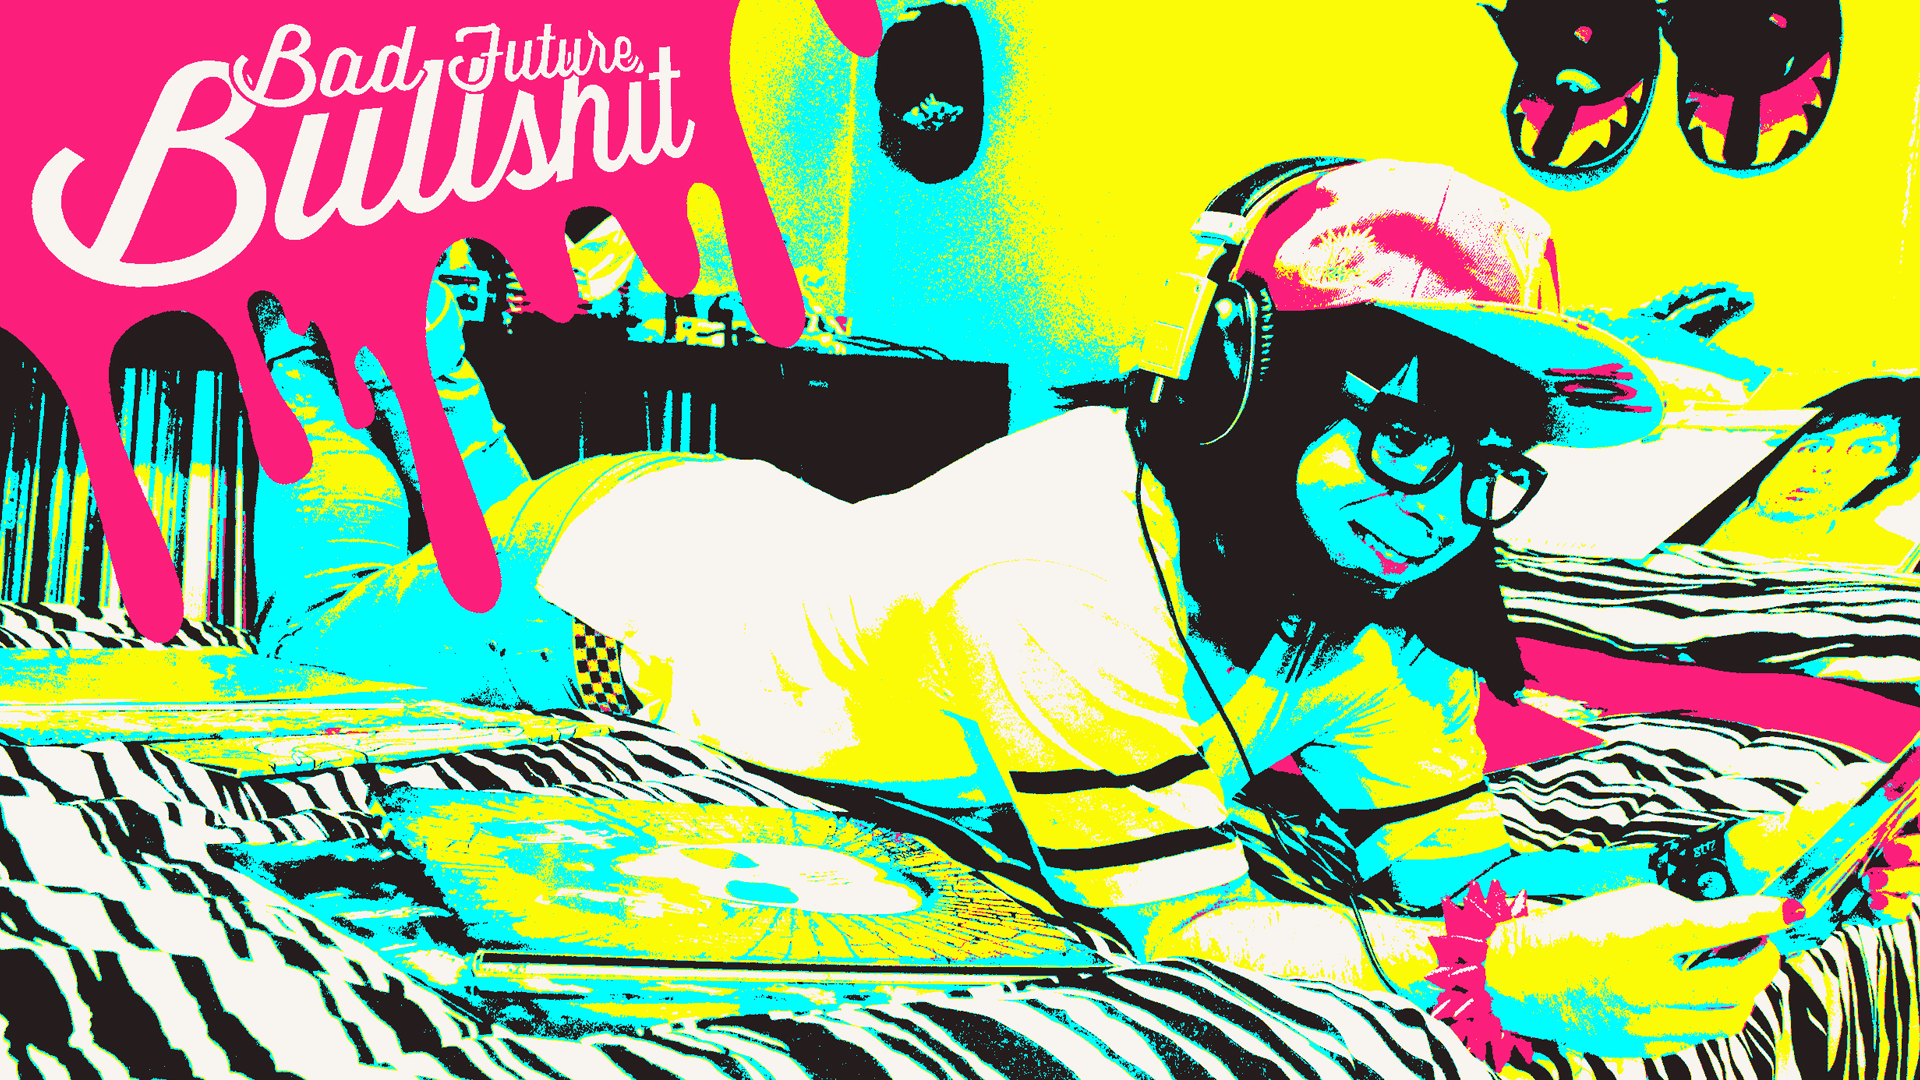 General 1920x1080 Lapfox Trax Renard colorful women women with glasses artwork women with hats lying on front CMYK yellow